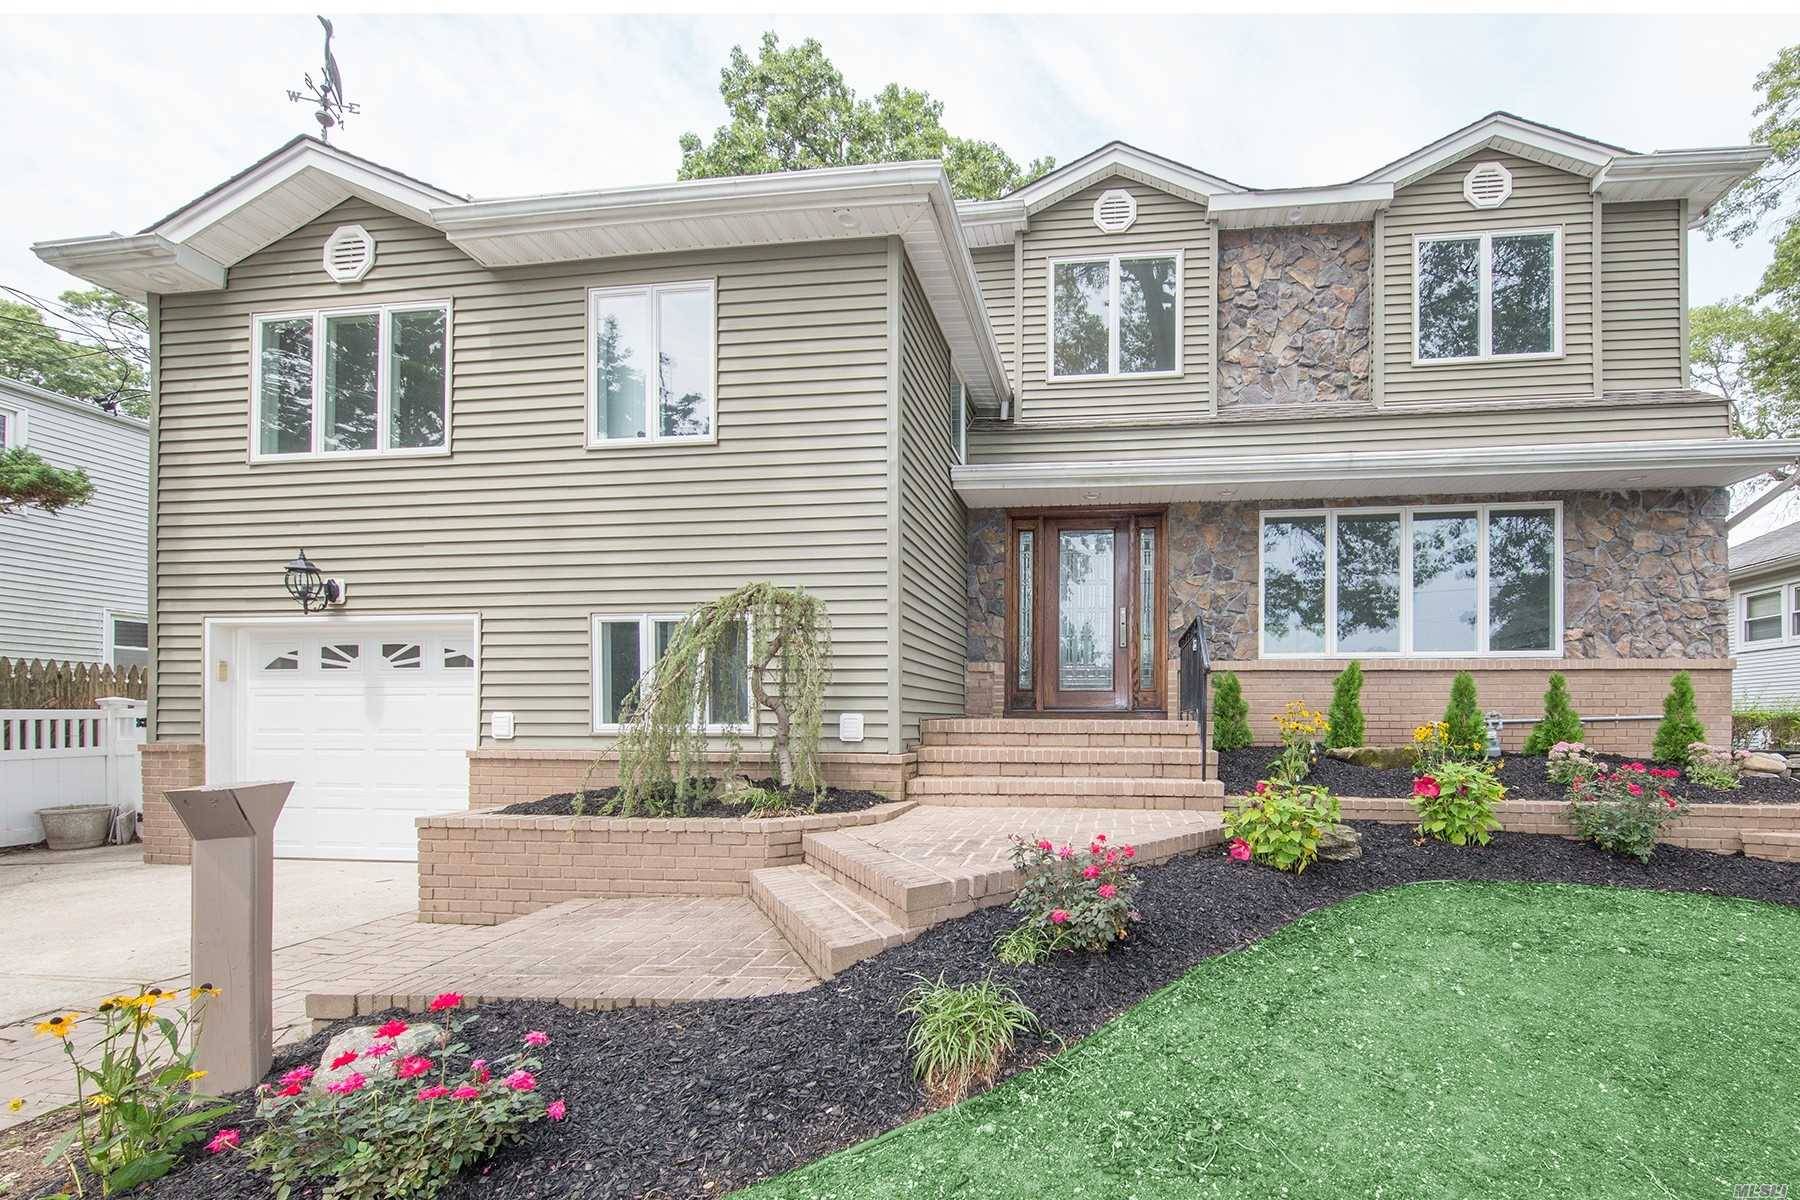 A Custom Designed And Attention To Detail Remodeled Exp Split In Beautiful Unqua Gardens!